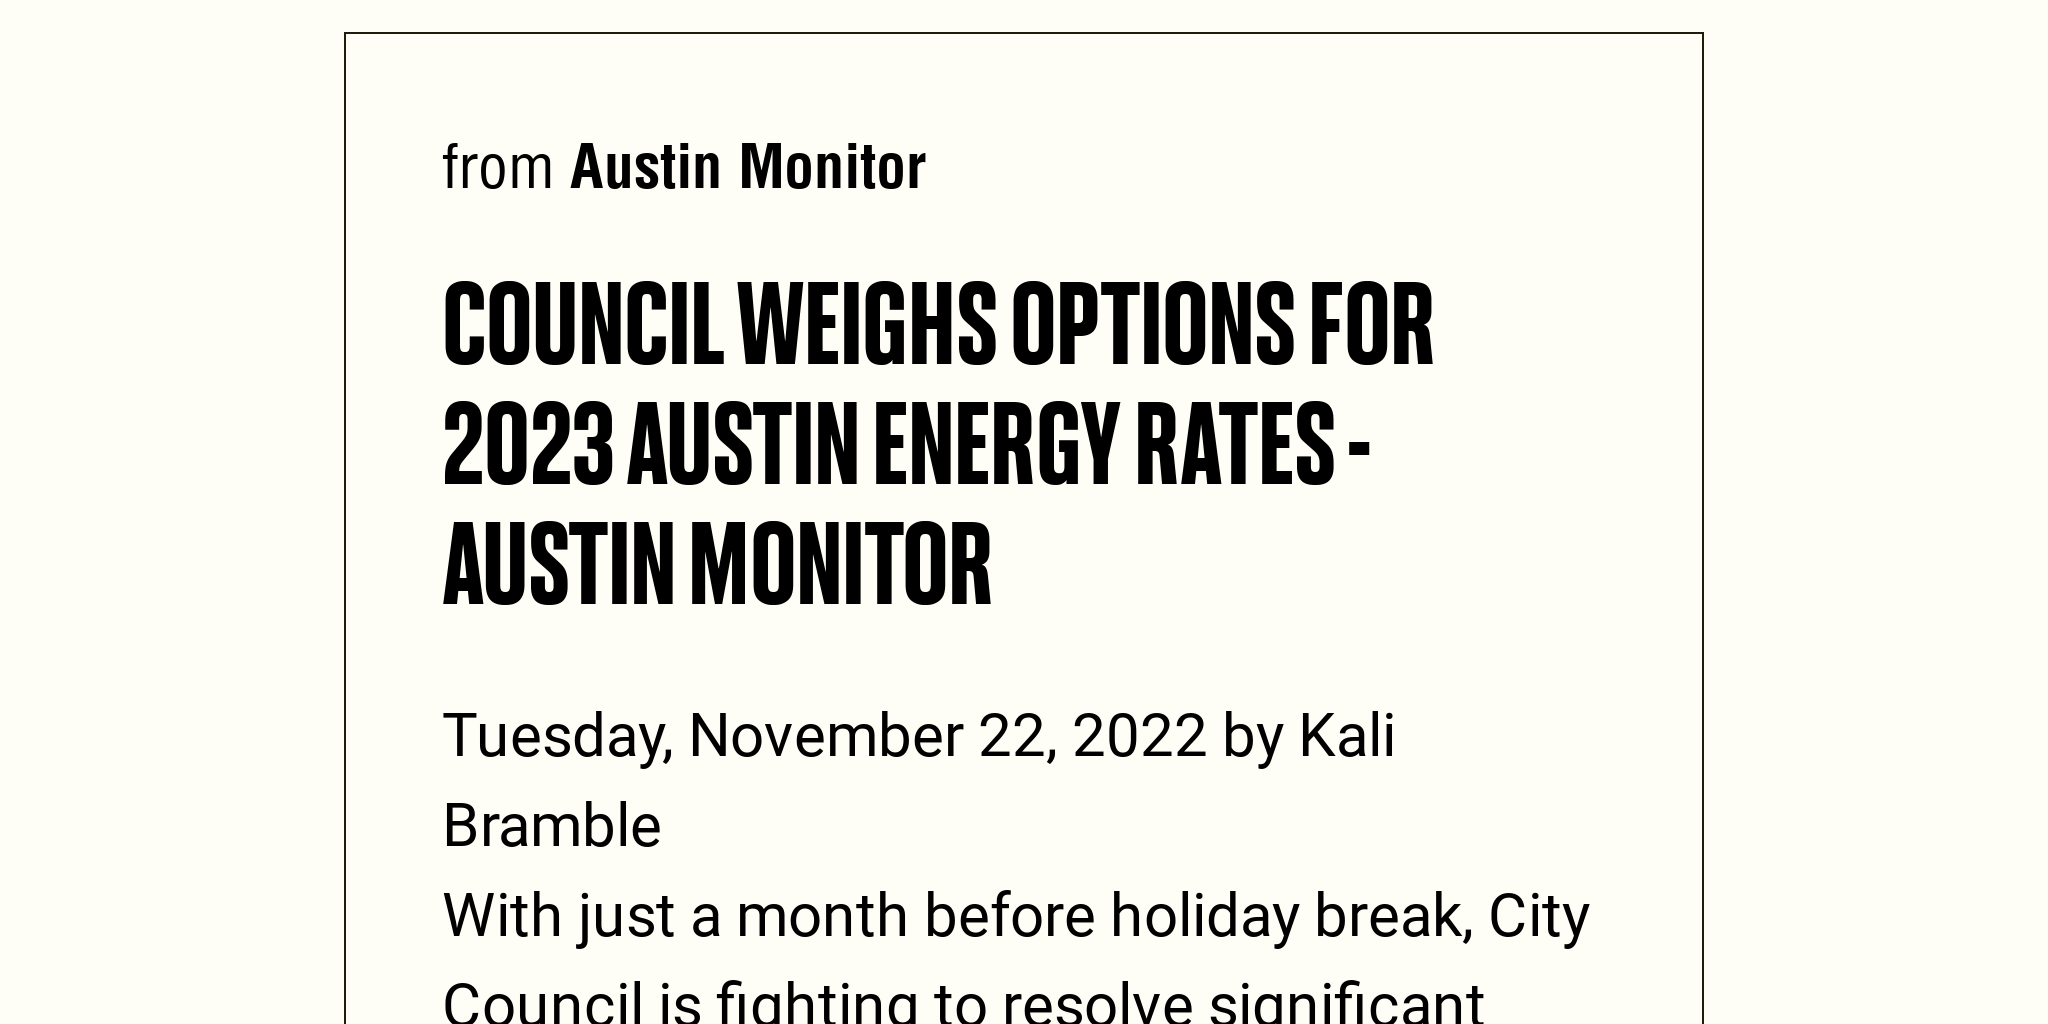 council-weighs-options-for-2023-austin-energy-rates-austin-monitor